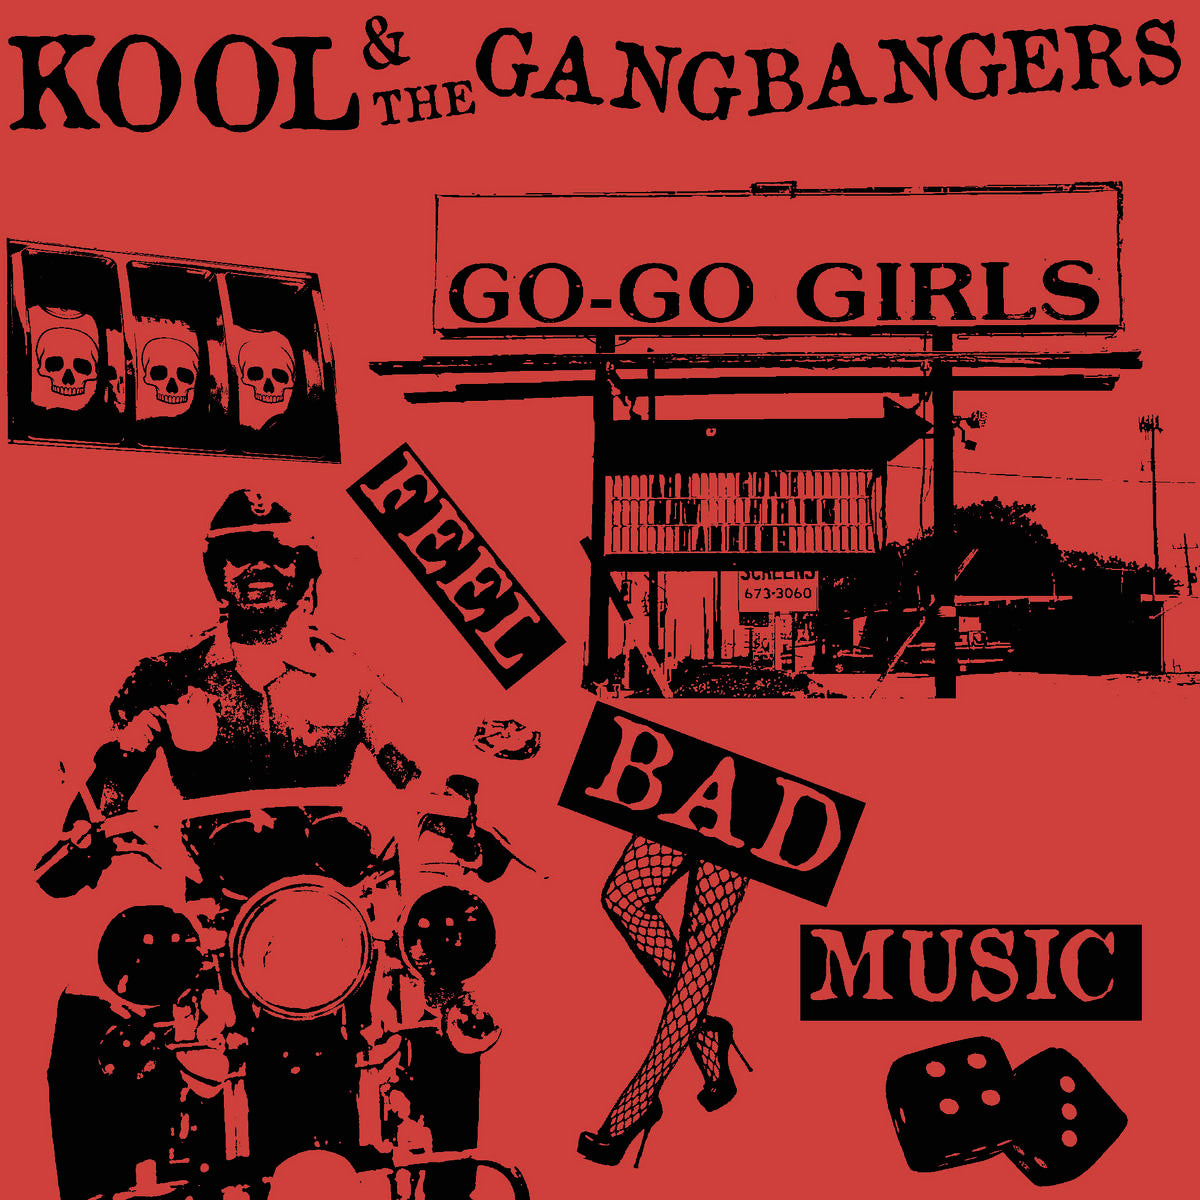 Kool & The Ganbangers- Feel Bad Music LP ~RARE RED + BLACK COVER LIMITED TO 50!